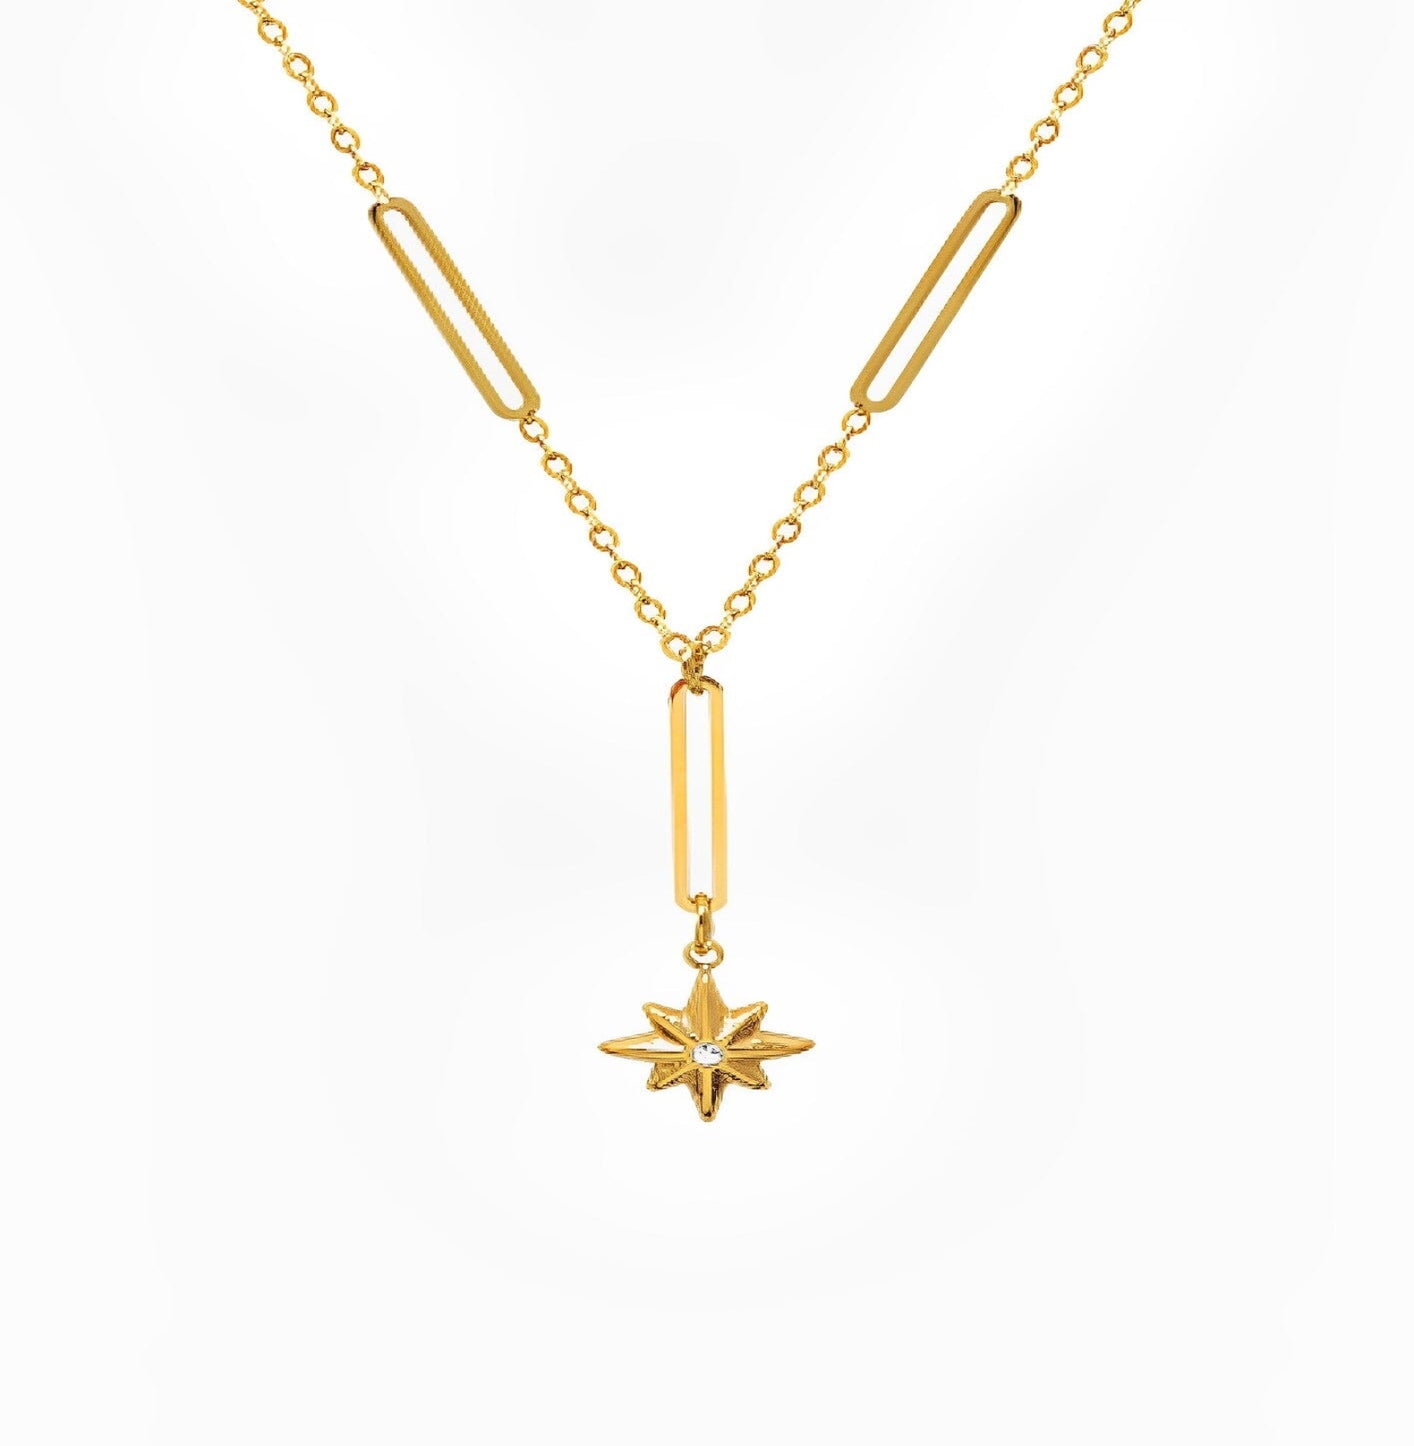 NORTH STAR NECKLACE neck Yubama Jewelry Online Store - The Elegant Designs of Gold and Silver ! 